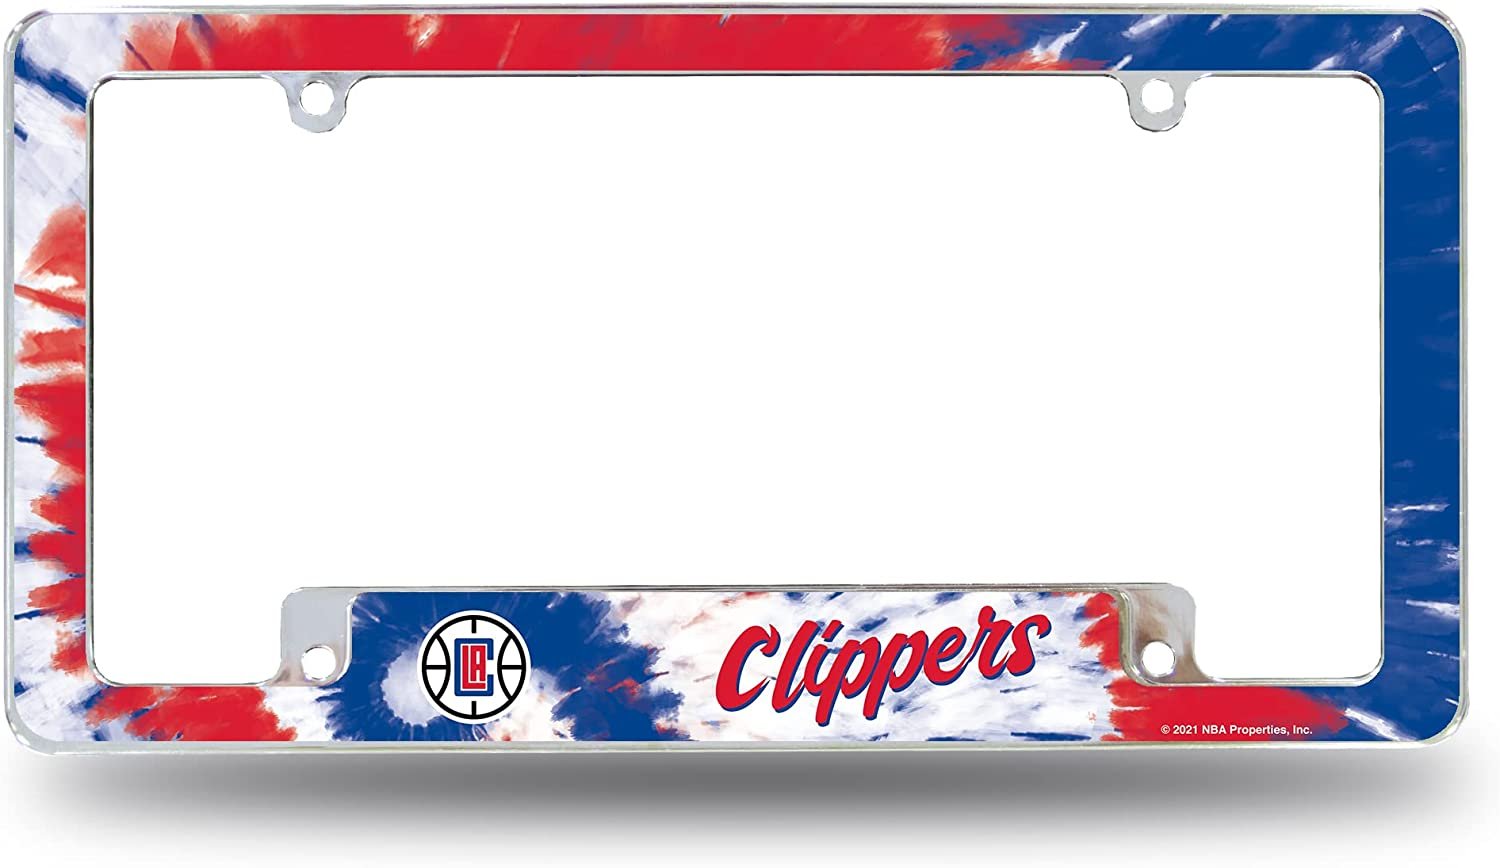 Los Angeles Clippers Metal License Plate Frame Chrome Tag Cover Tie Dye Design 6x12 Inch